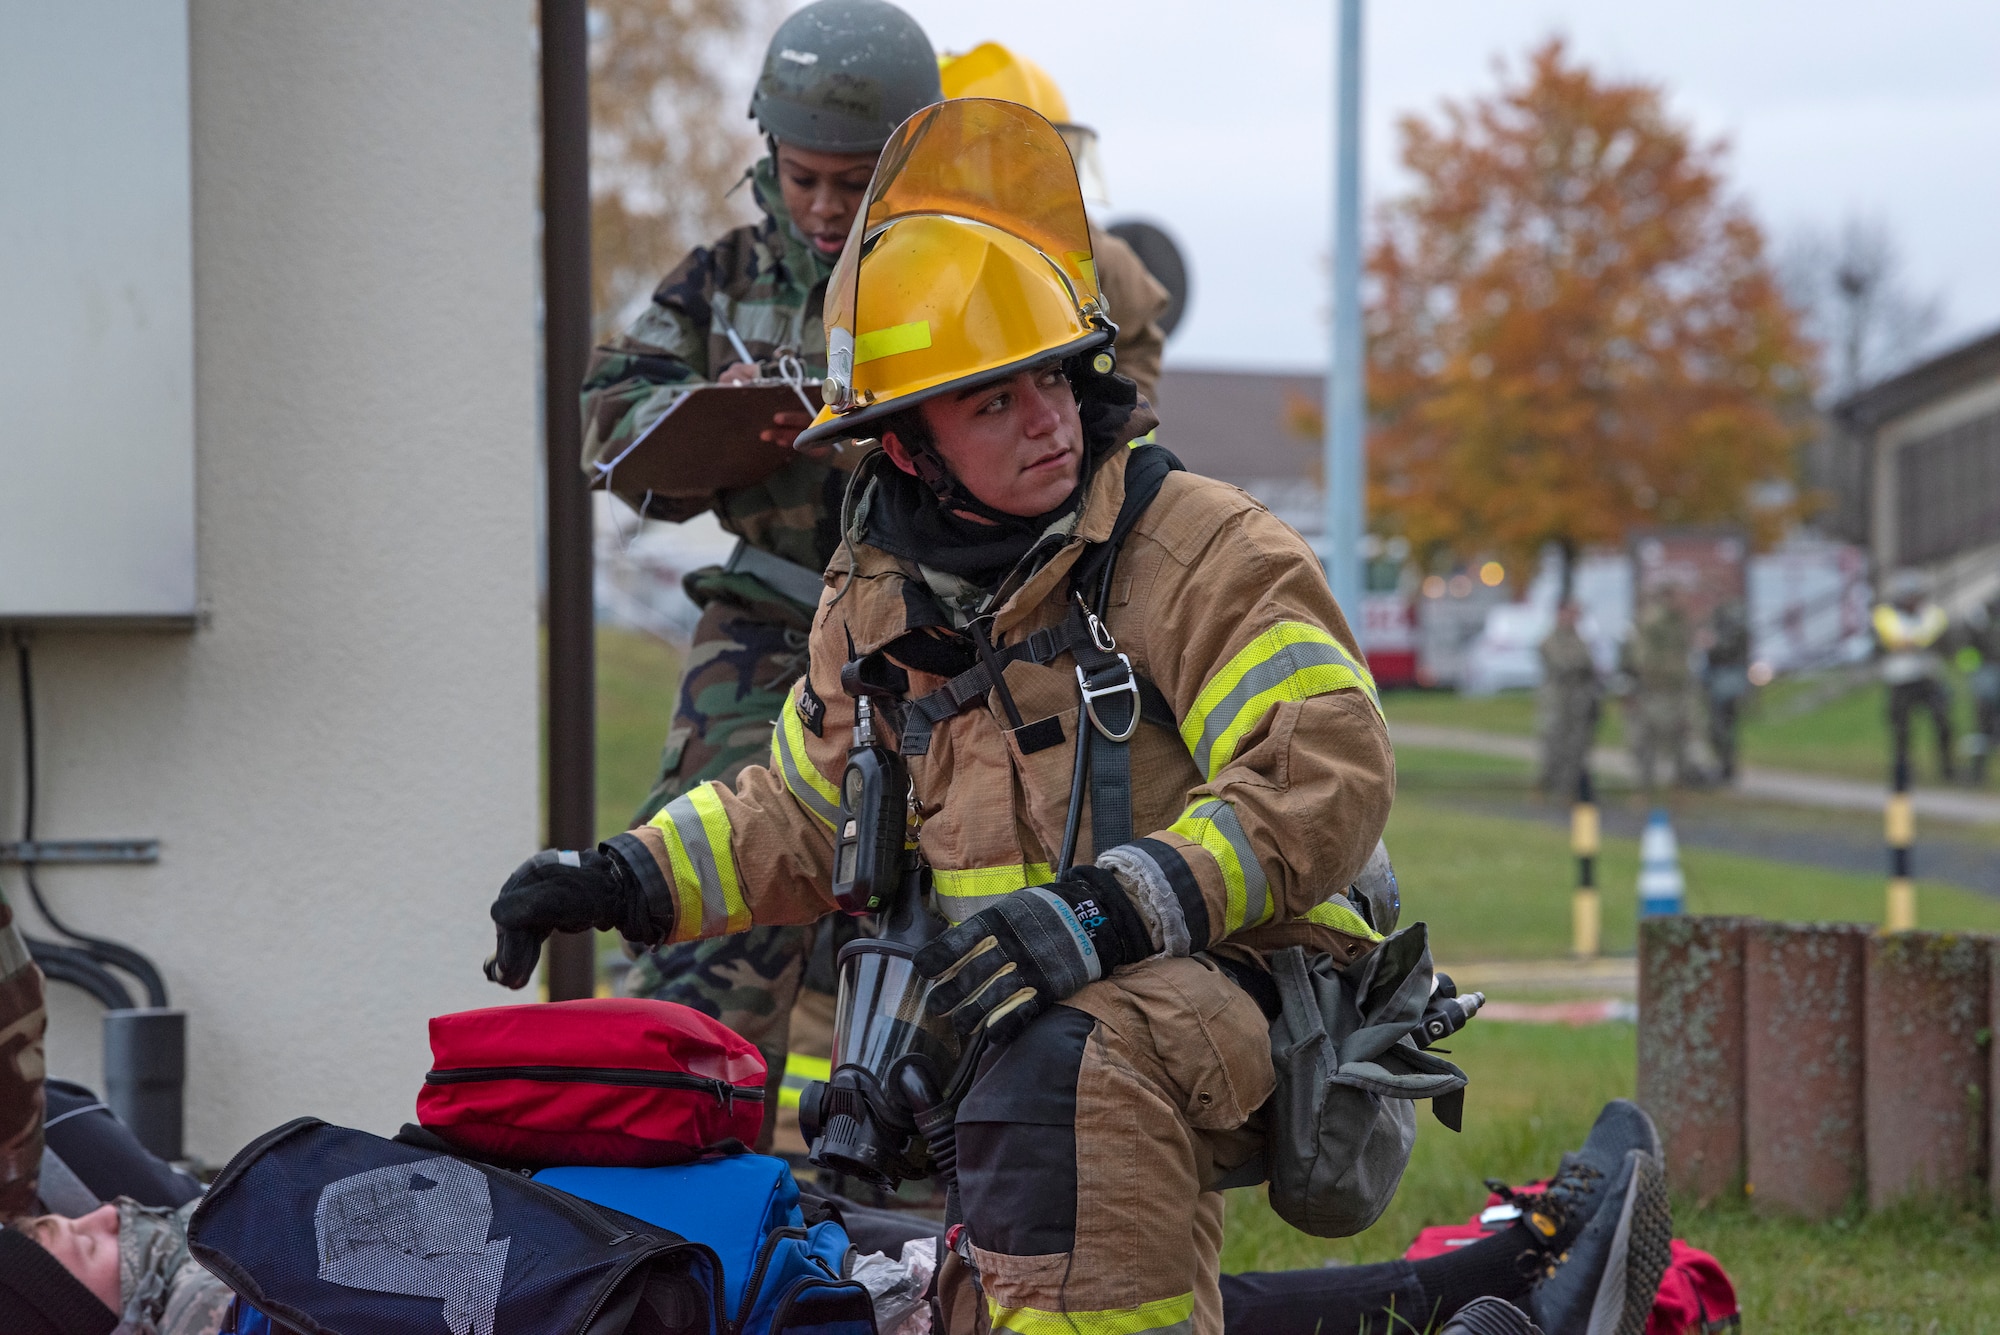 U.S. Air Force Airman 1st Class Christian Adamich, 52nd Civil Engineer Squadron Fire and Emergency Services flight firefighter, responds to a mass casualty simulation, Nov. 4, 2021, on Spangdahlem Air Base, Germany. The 52nd FES Airmen aided in response by extricating victims from a distressed building, transporting them to triage, and aiding medical personnel. (U.S. Air Force photo by Tech. Sgt. Anthony Plyler)